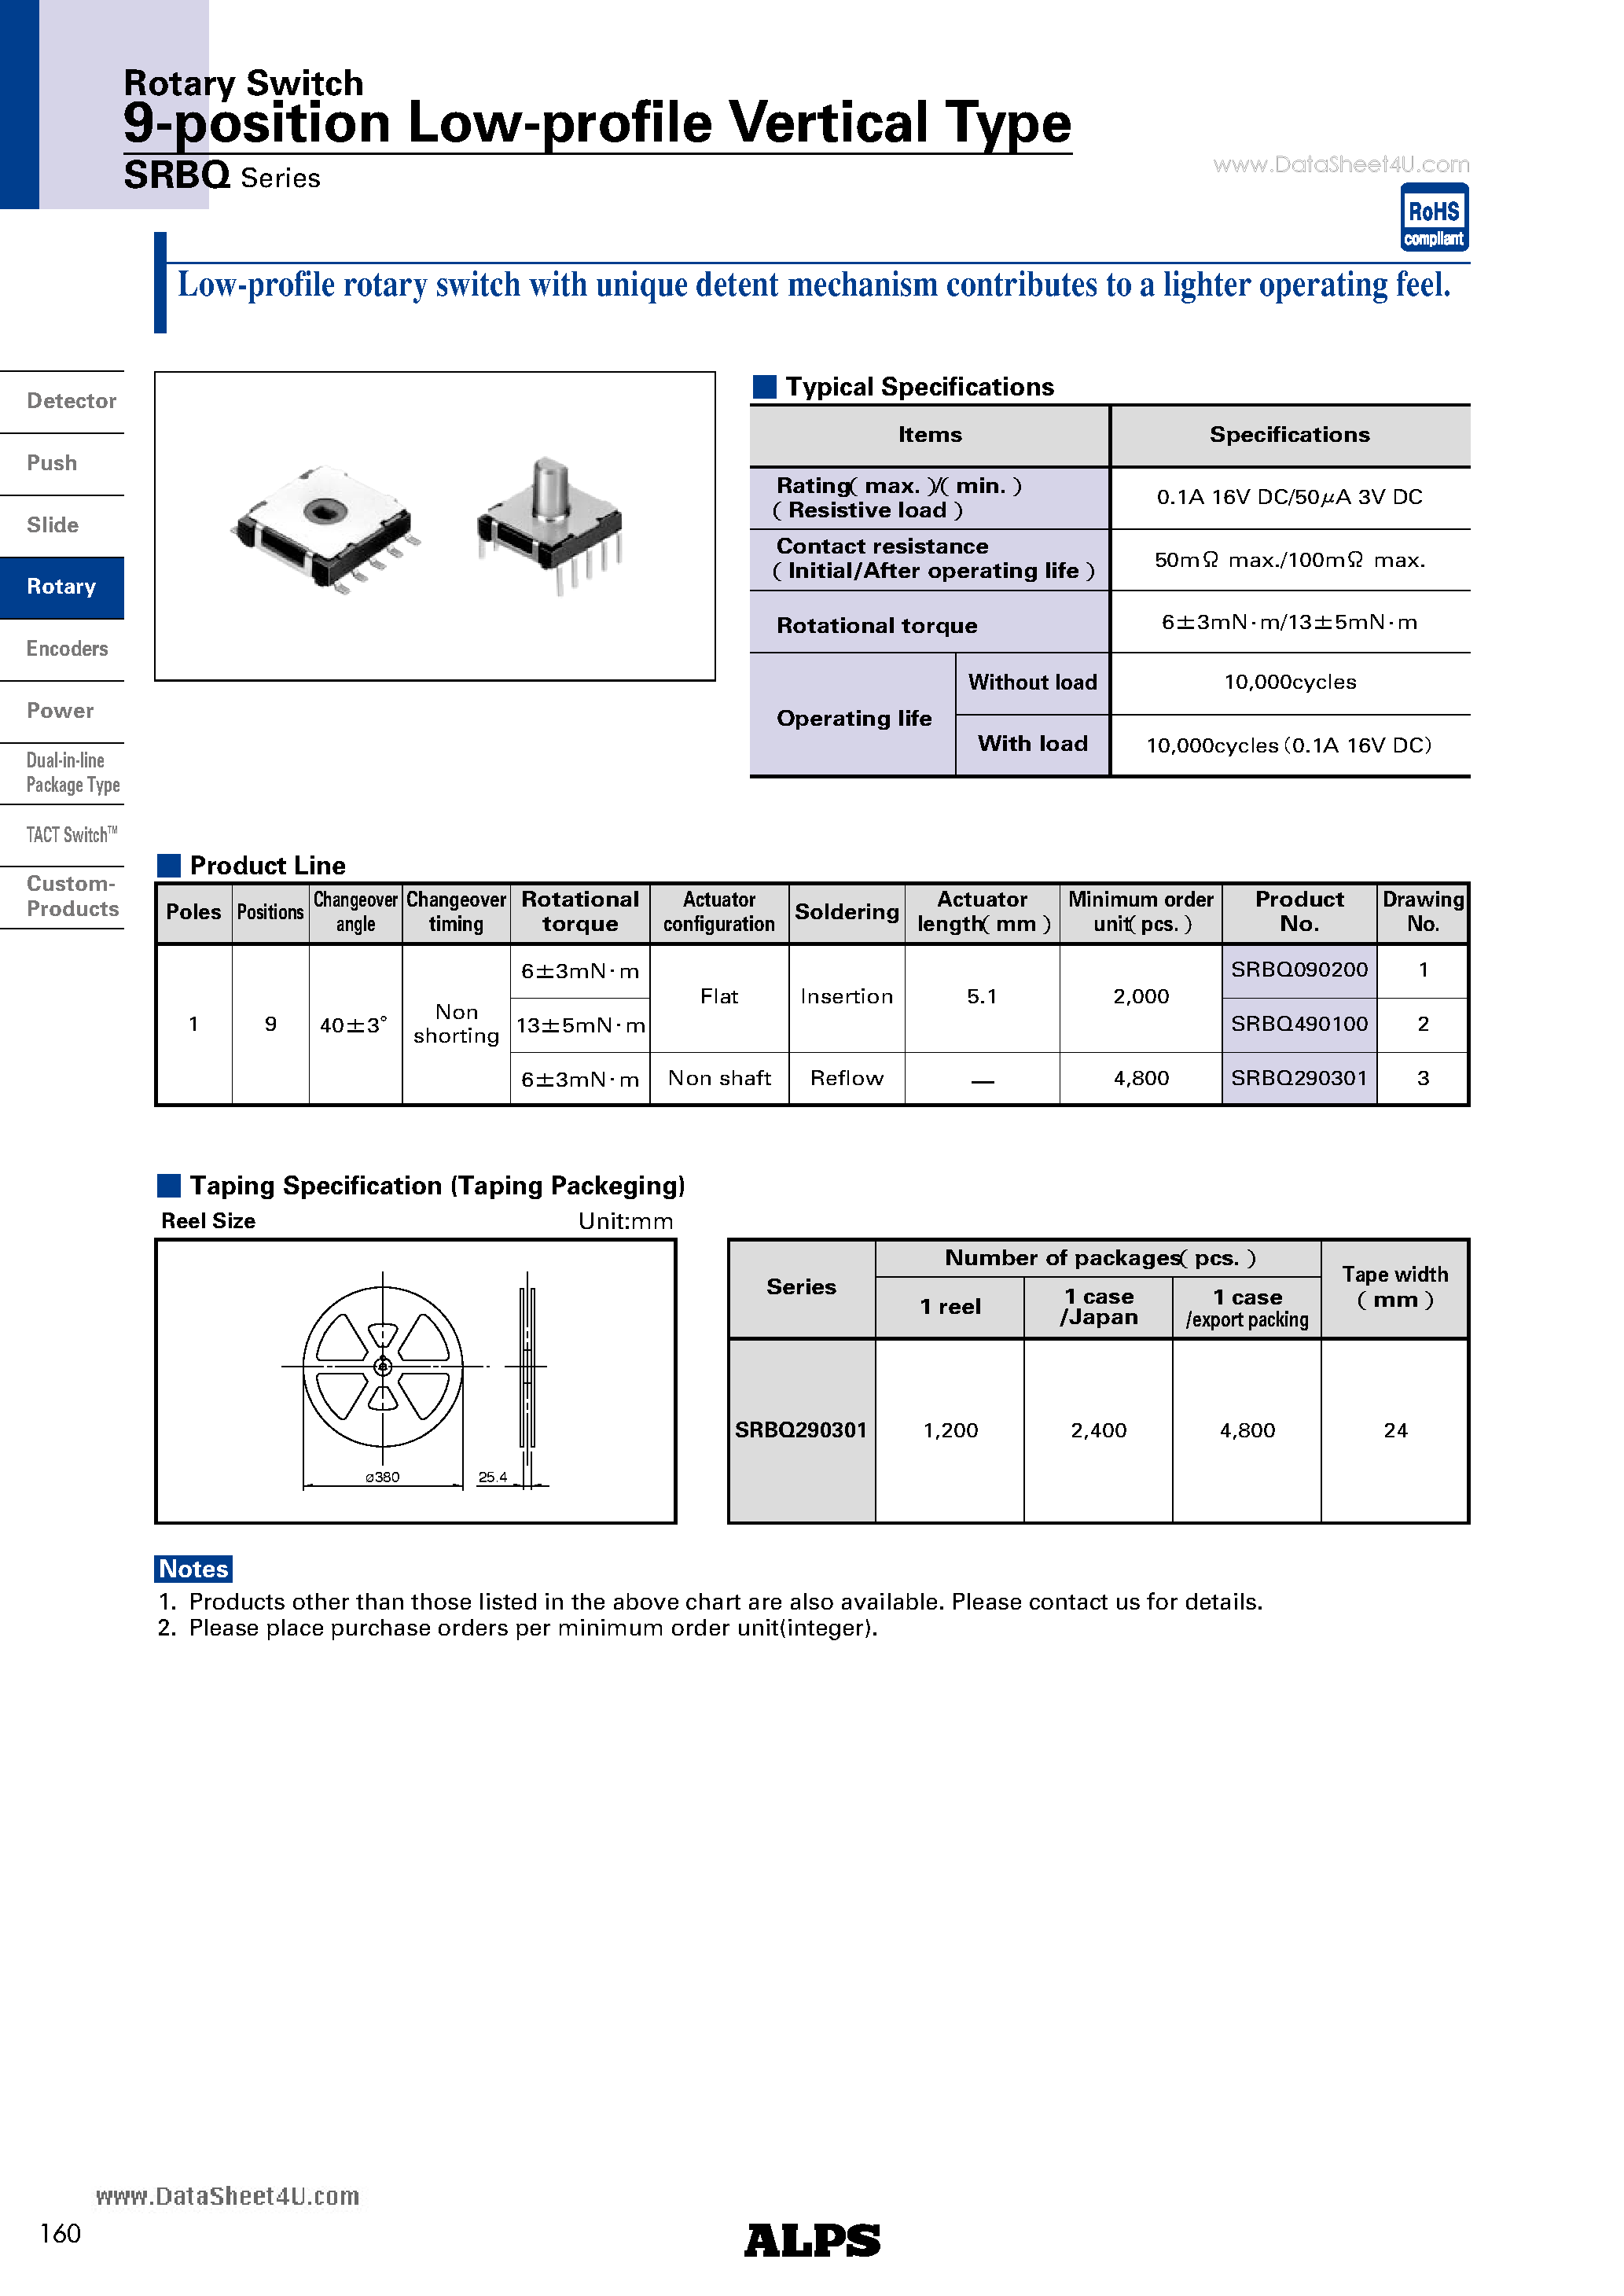 Datasheet SRBQ - 9-position Low-profile Vertical Type page 1